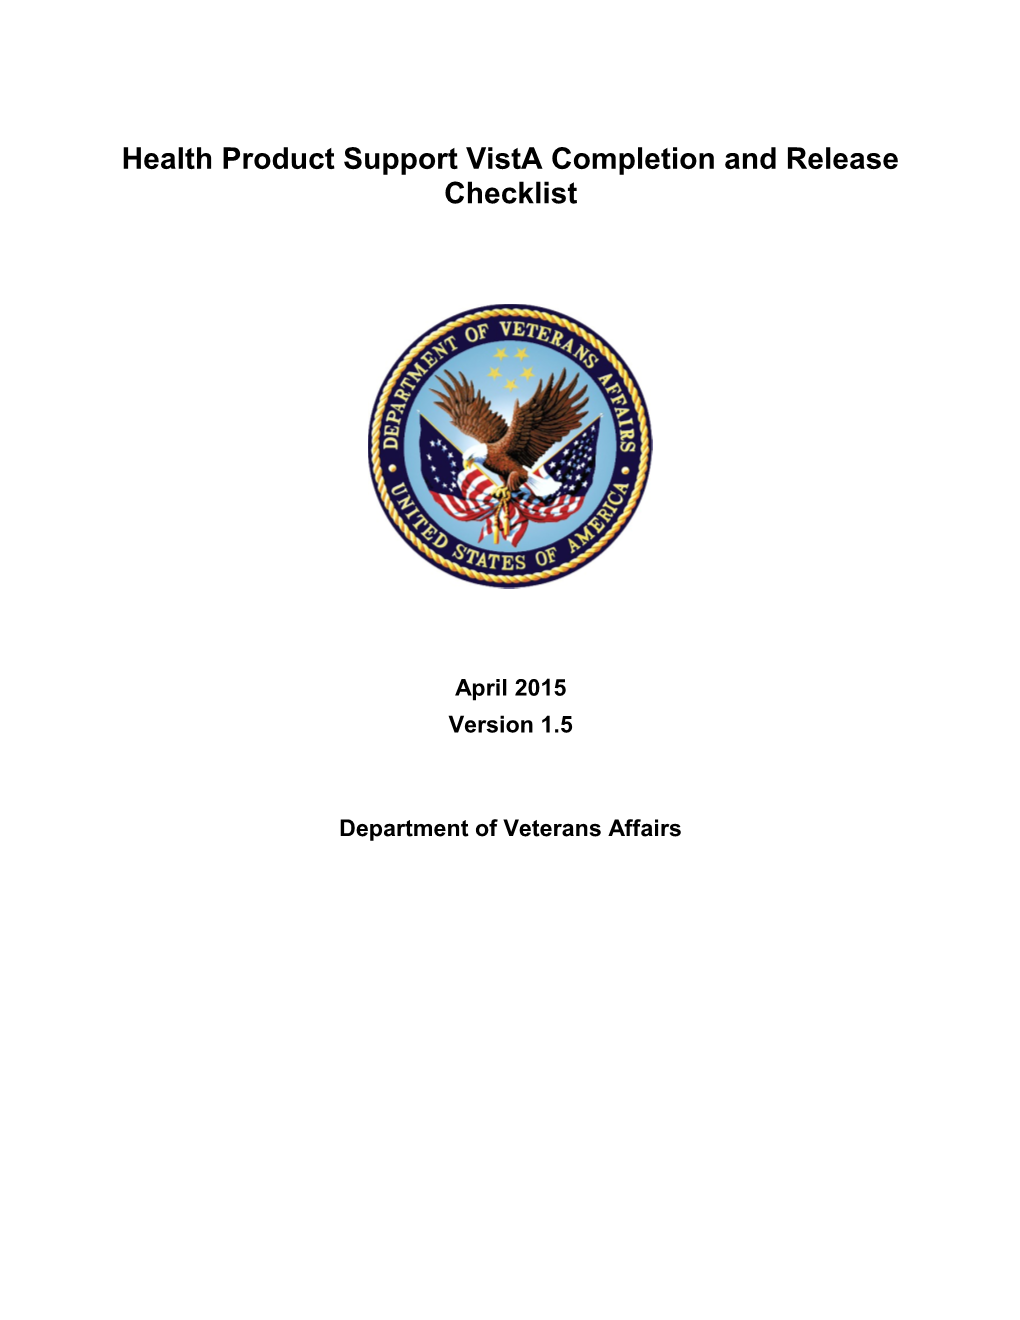 Health Product Support Vista Completion and Release Checklist